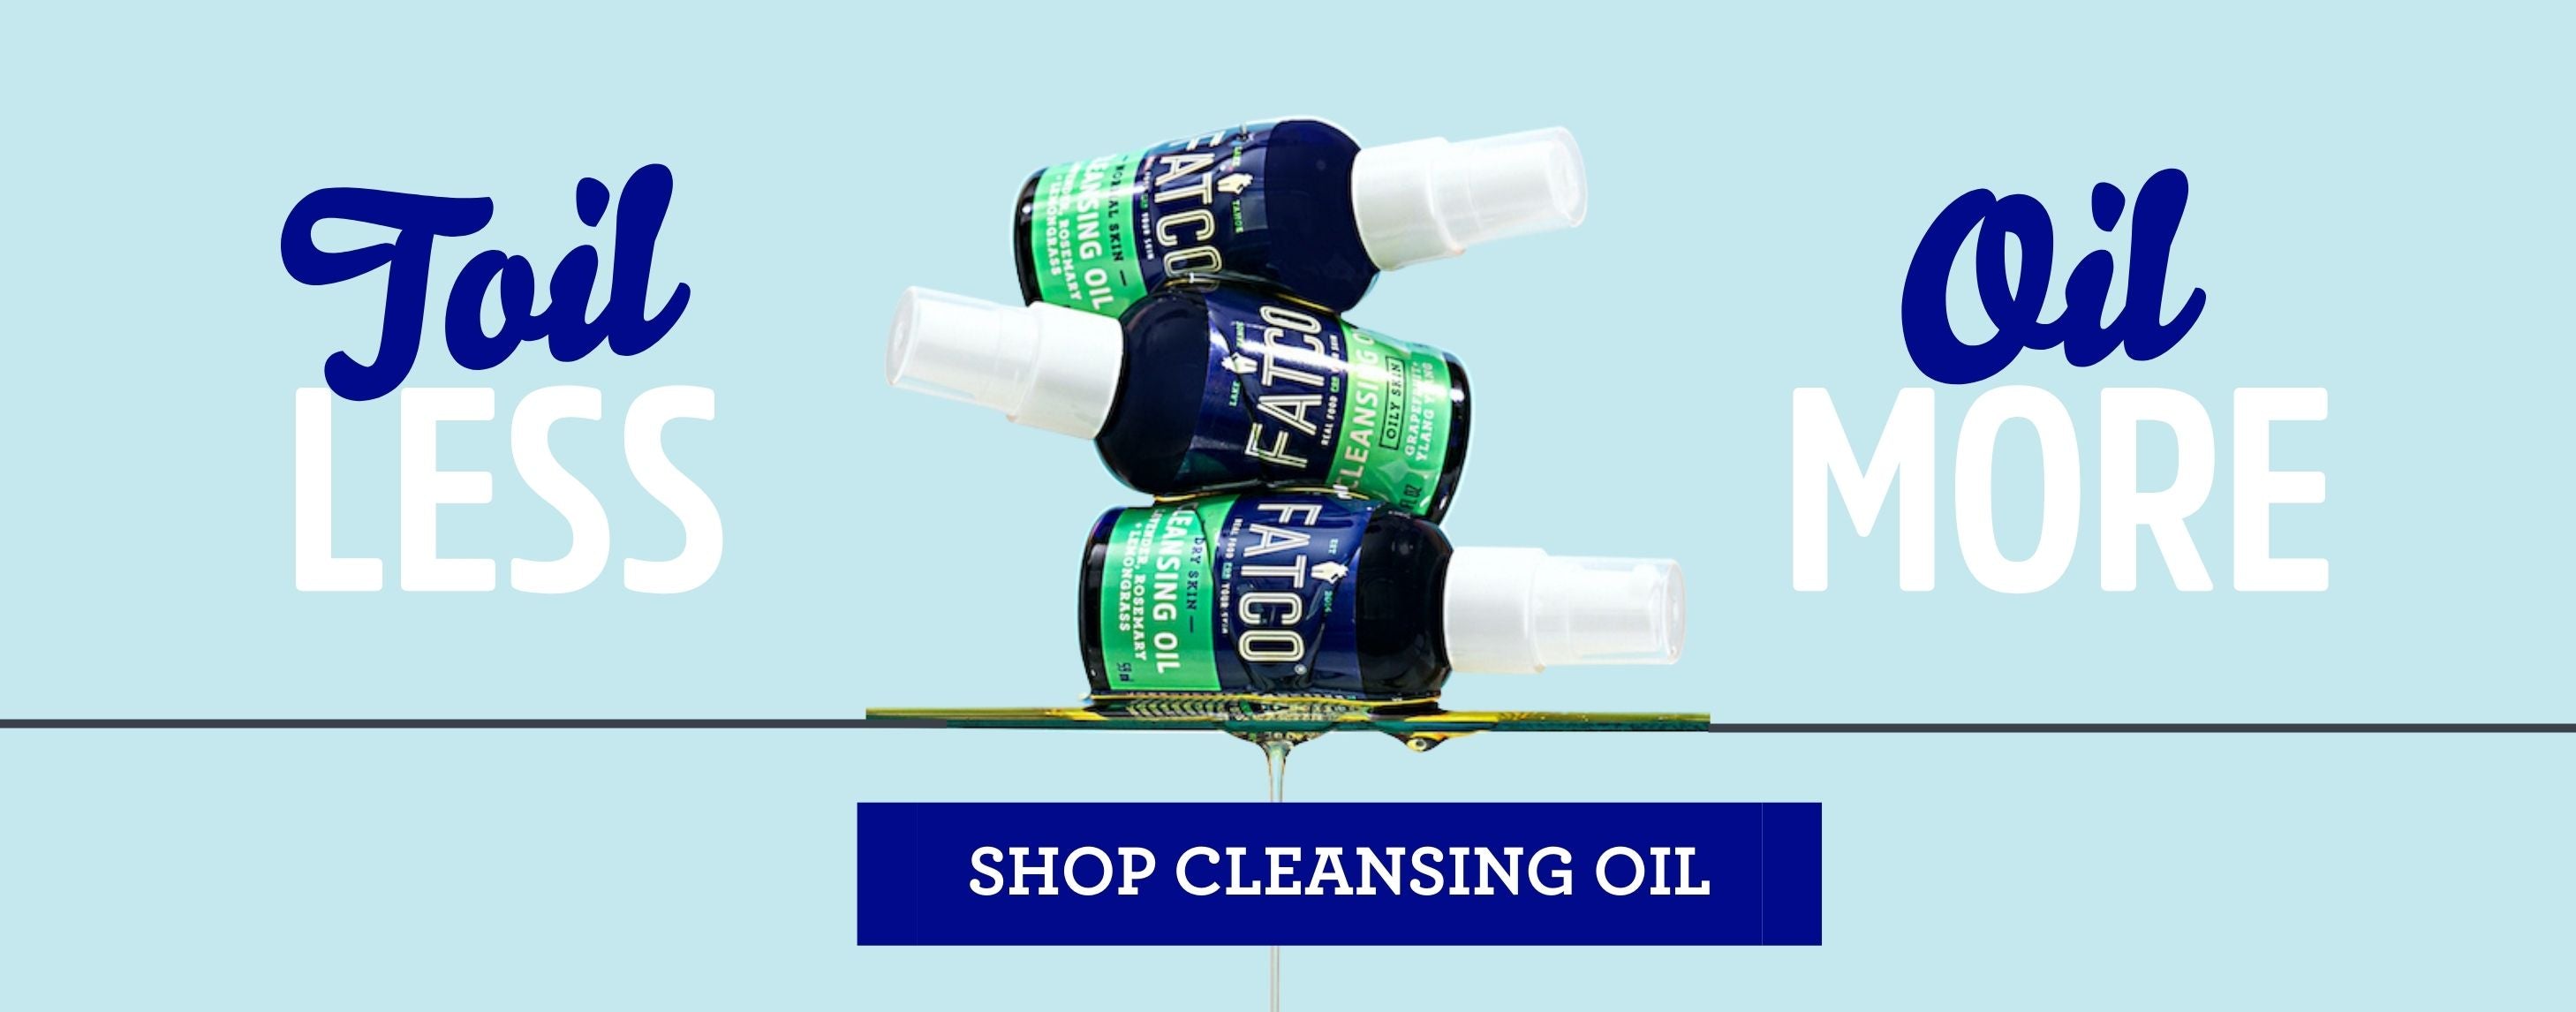 Toil Less Oil More Shop Cleansing Oil